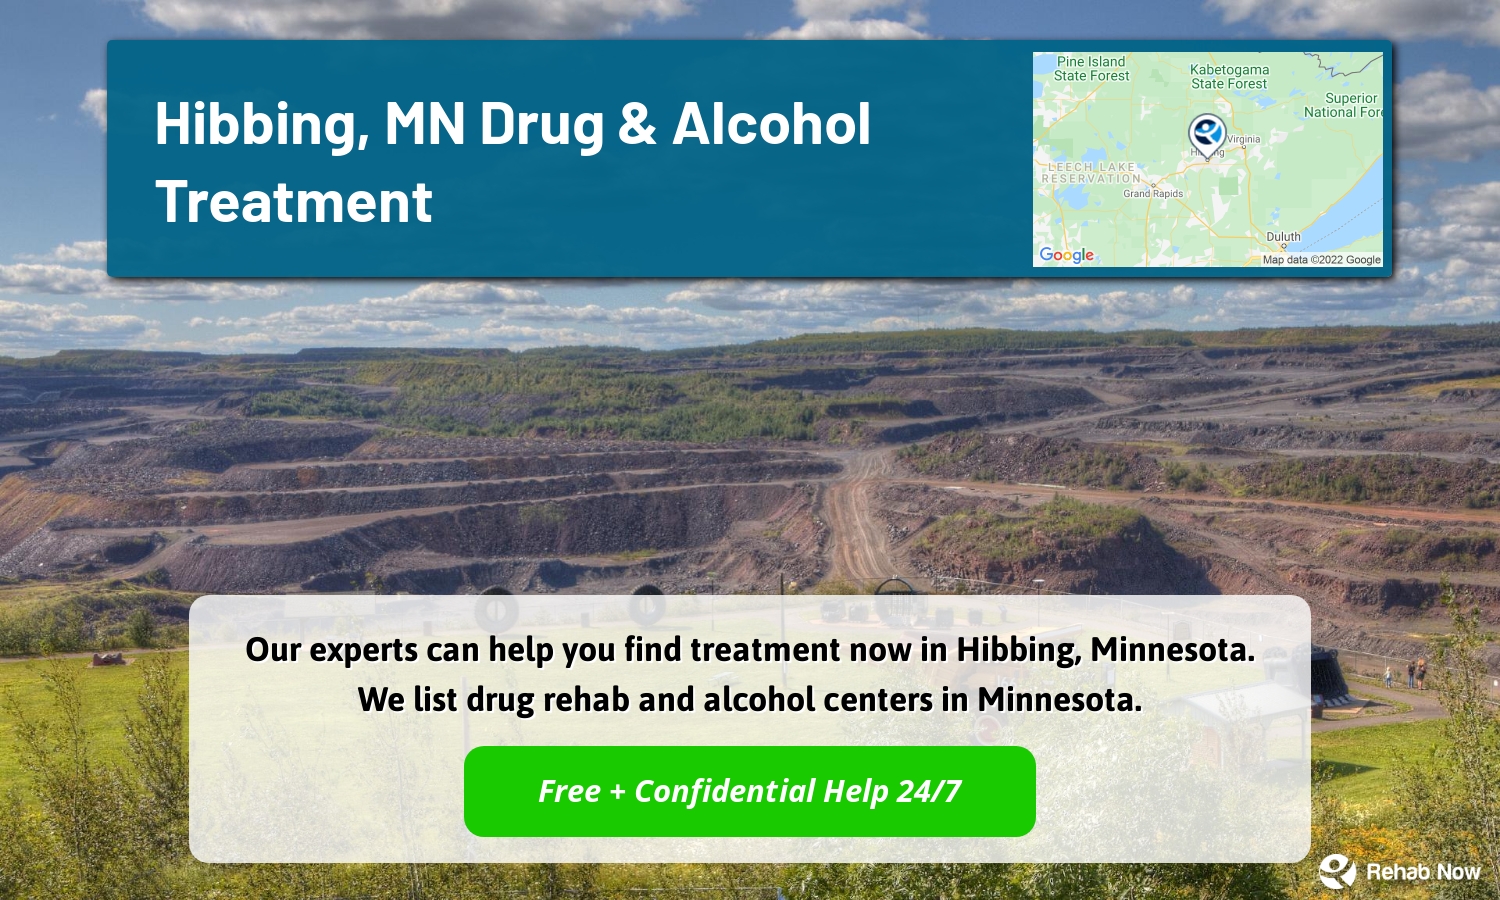 Our experts can help you find treatment now in Hibbing, Minnesota. We list drug rehab and alcohol centers in Minnesota.